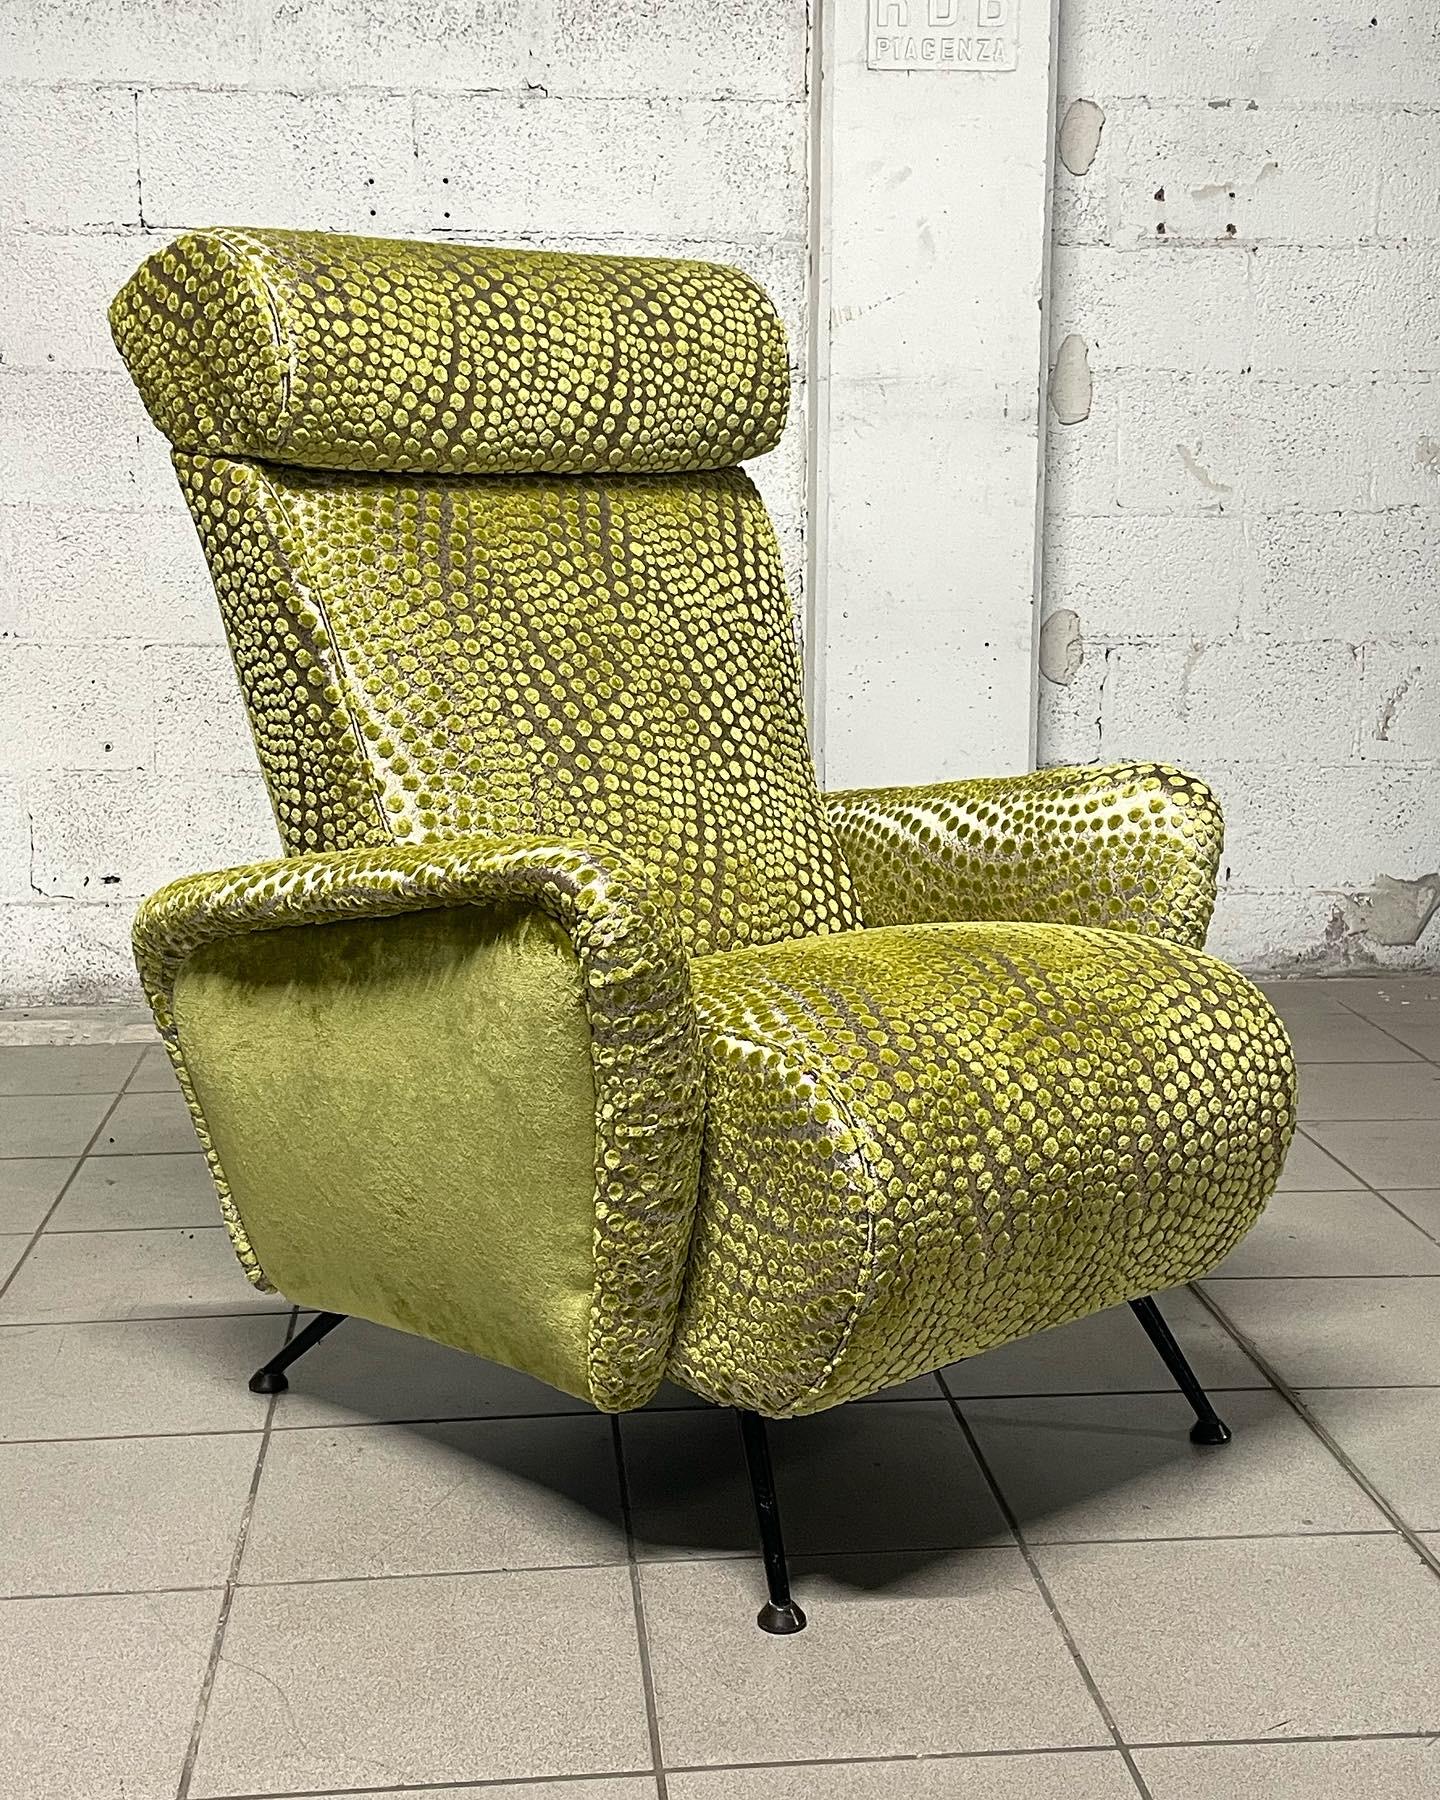 1950s recliner armchair with new velvet upholstery with a great finish.

The chair reclines to three positions with an original and comfortable headrest.

It has been entirely redone with major upholstery work.

Iron feet.